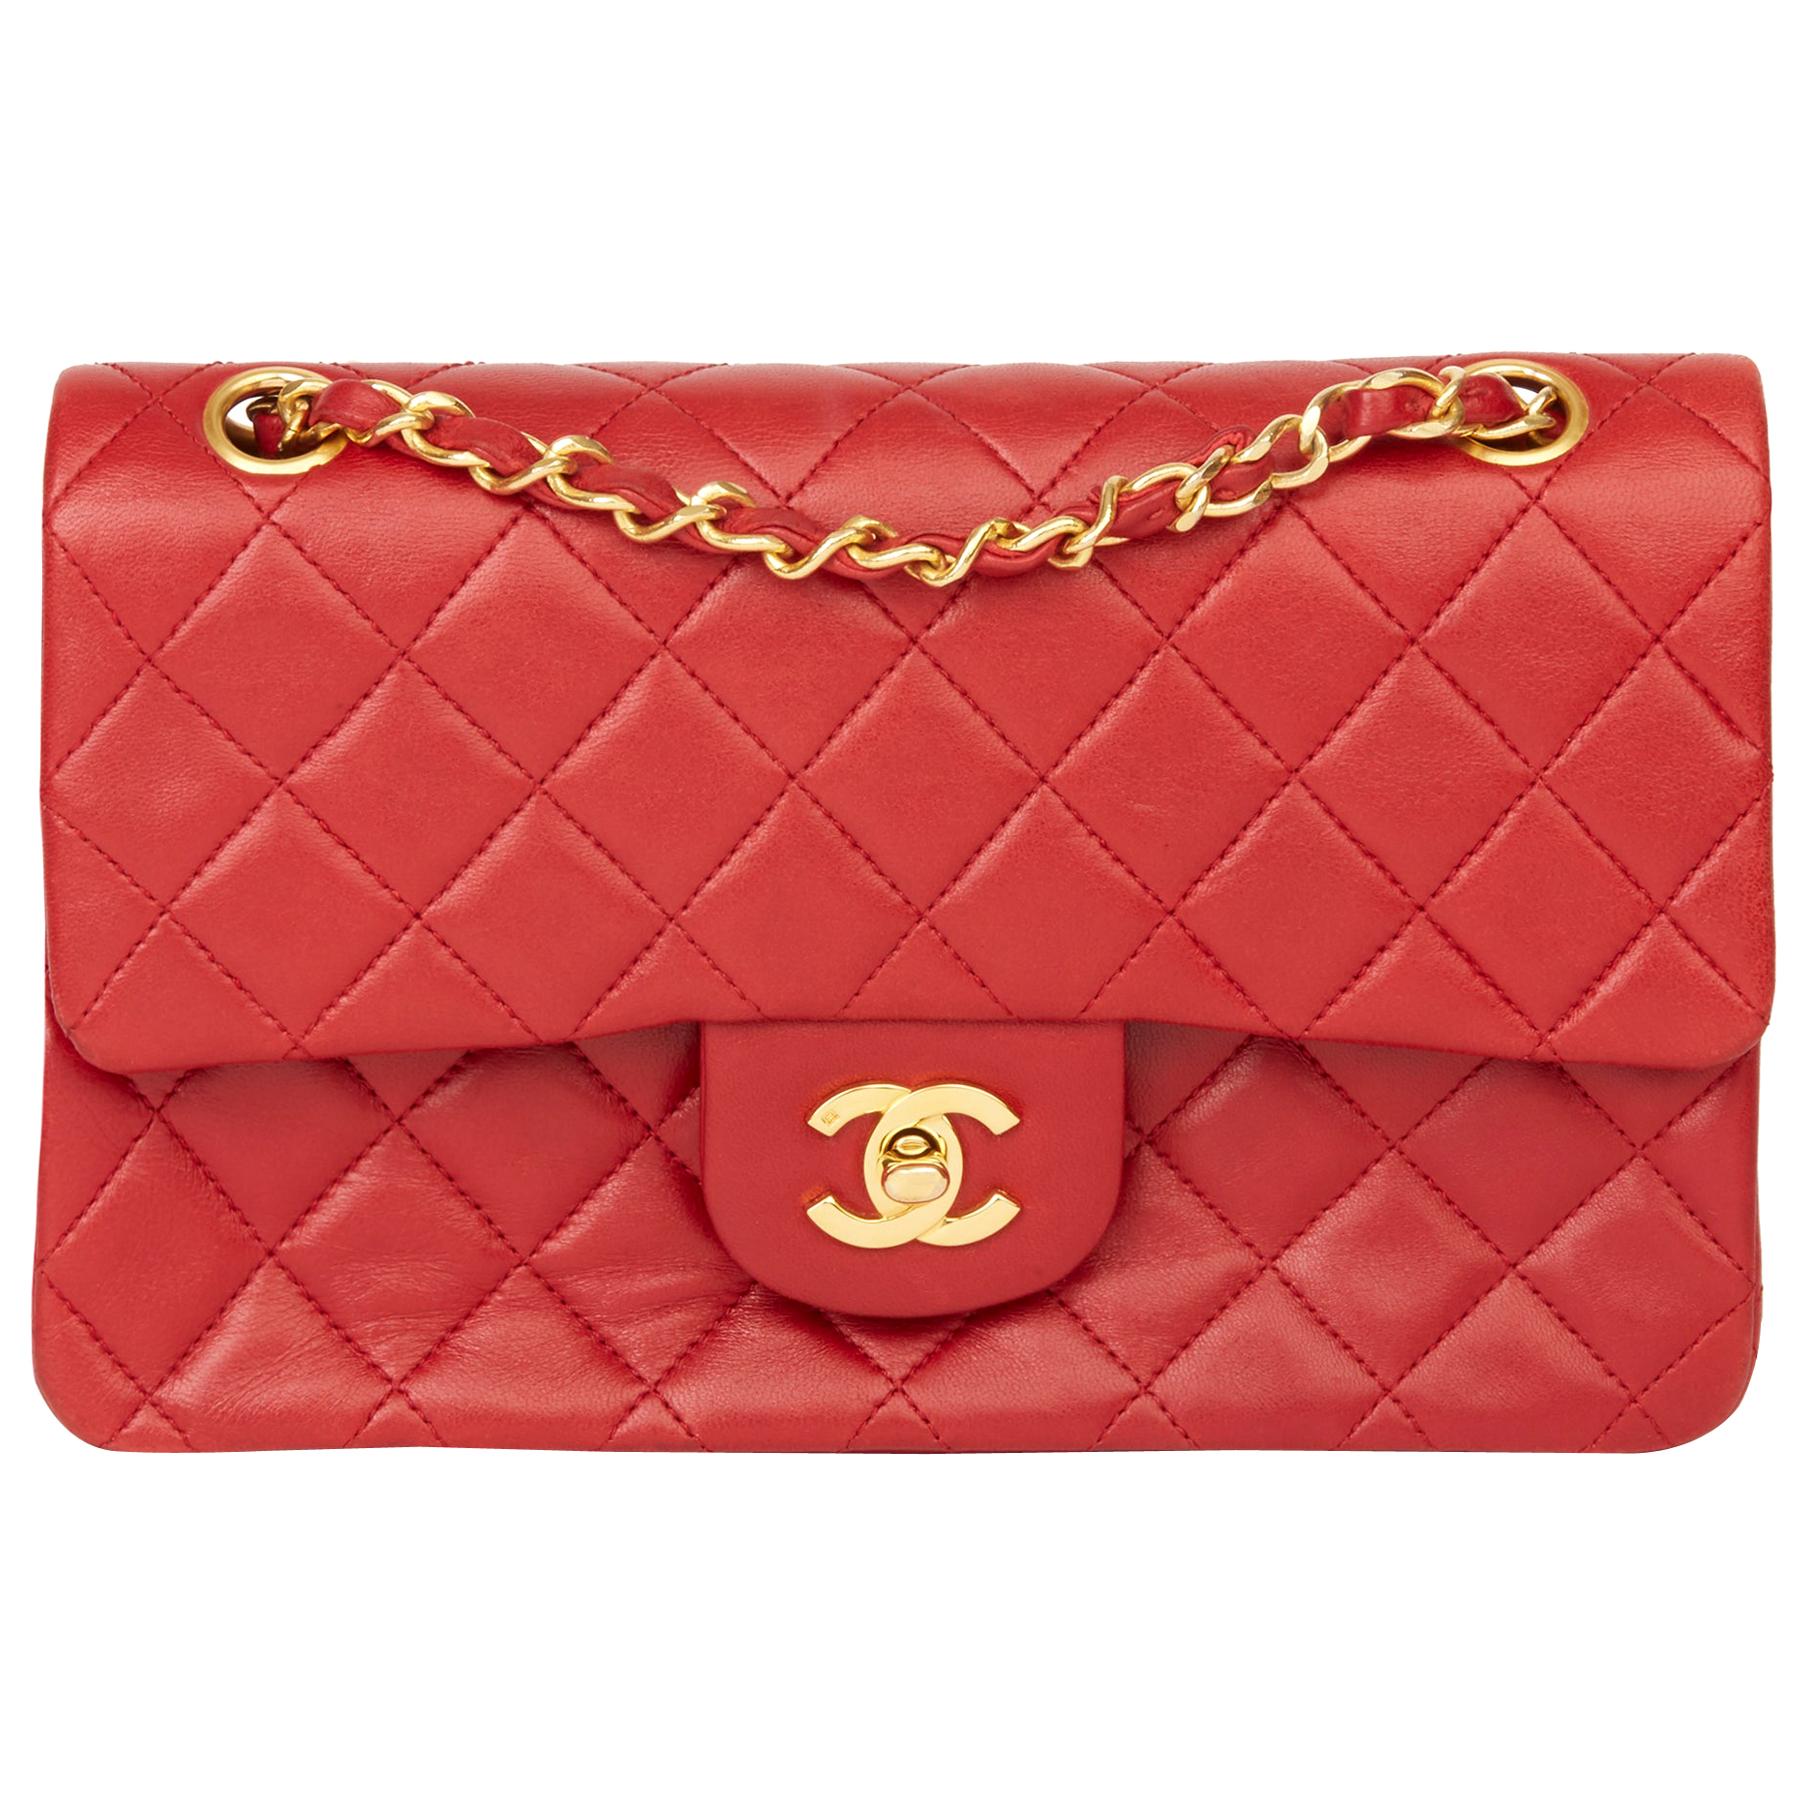 1991 Chanel Red Quilted Lambskin Vintage Small Classic Double Flap Bag 